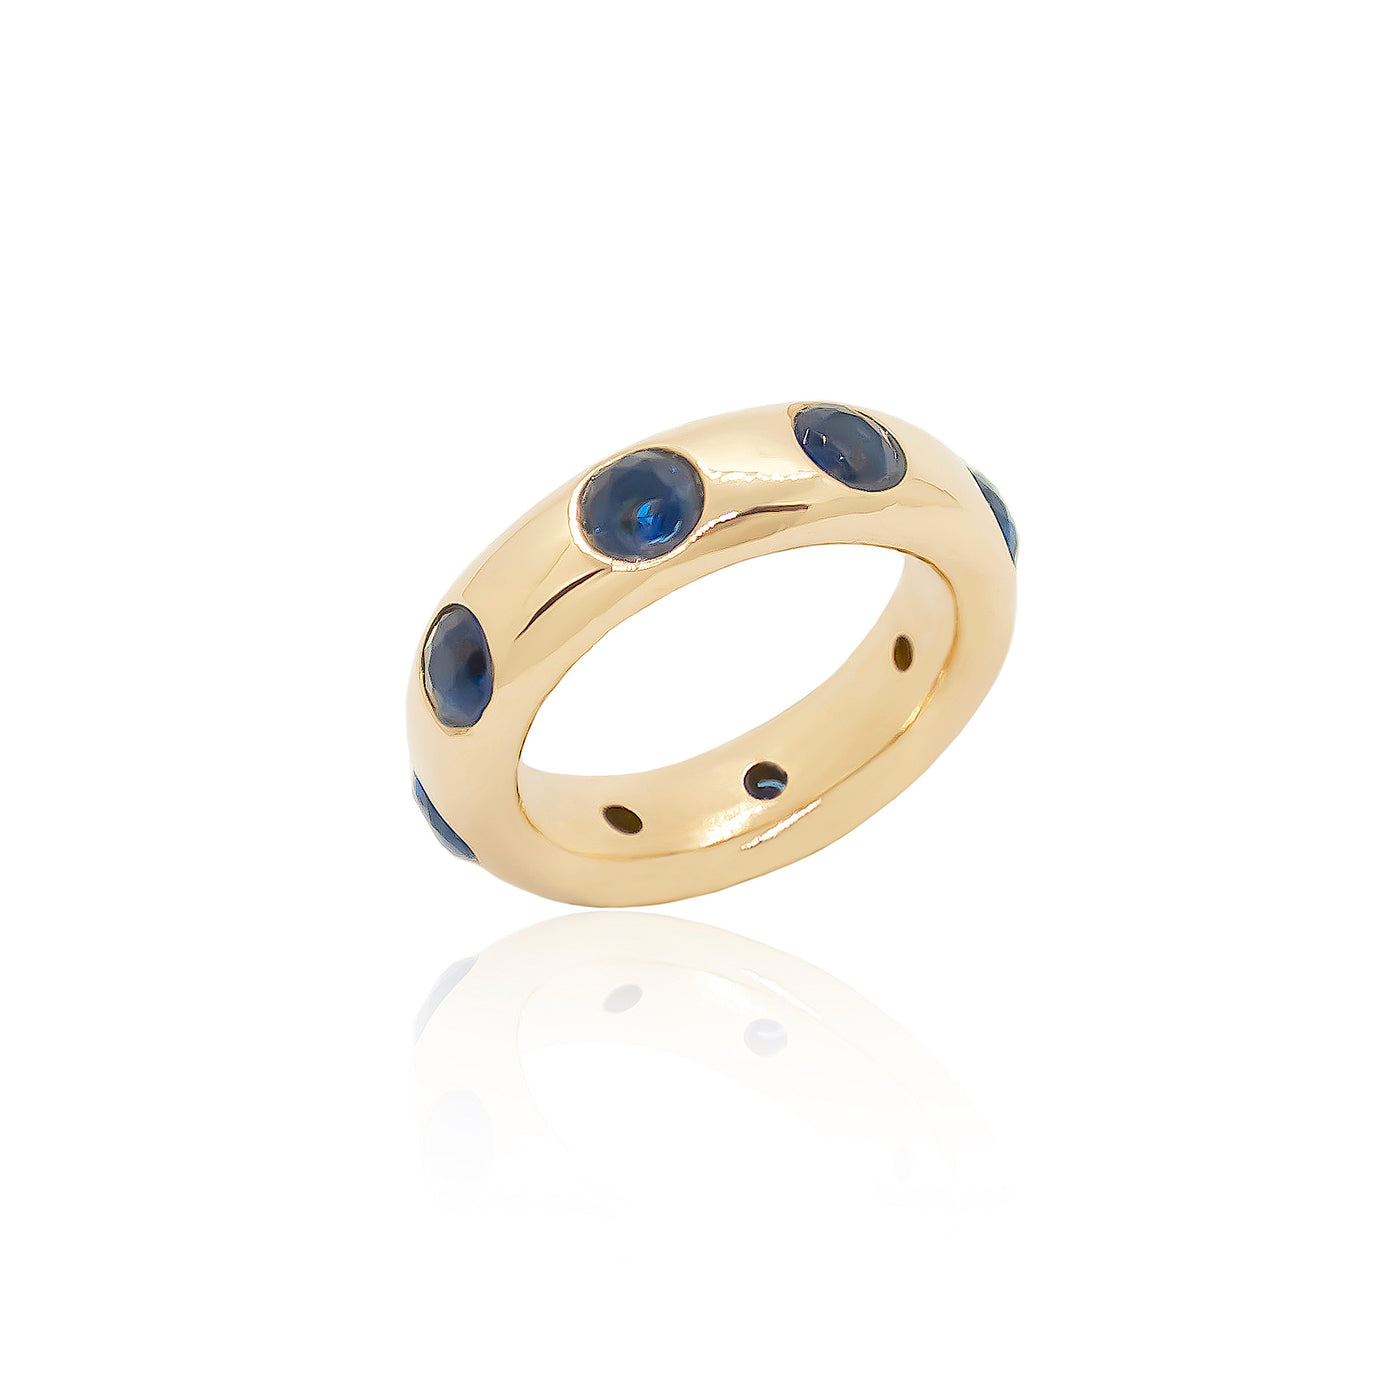 Gold Infinity band ring with blue sapphires from Atelier ORMAN